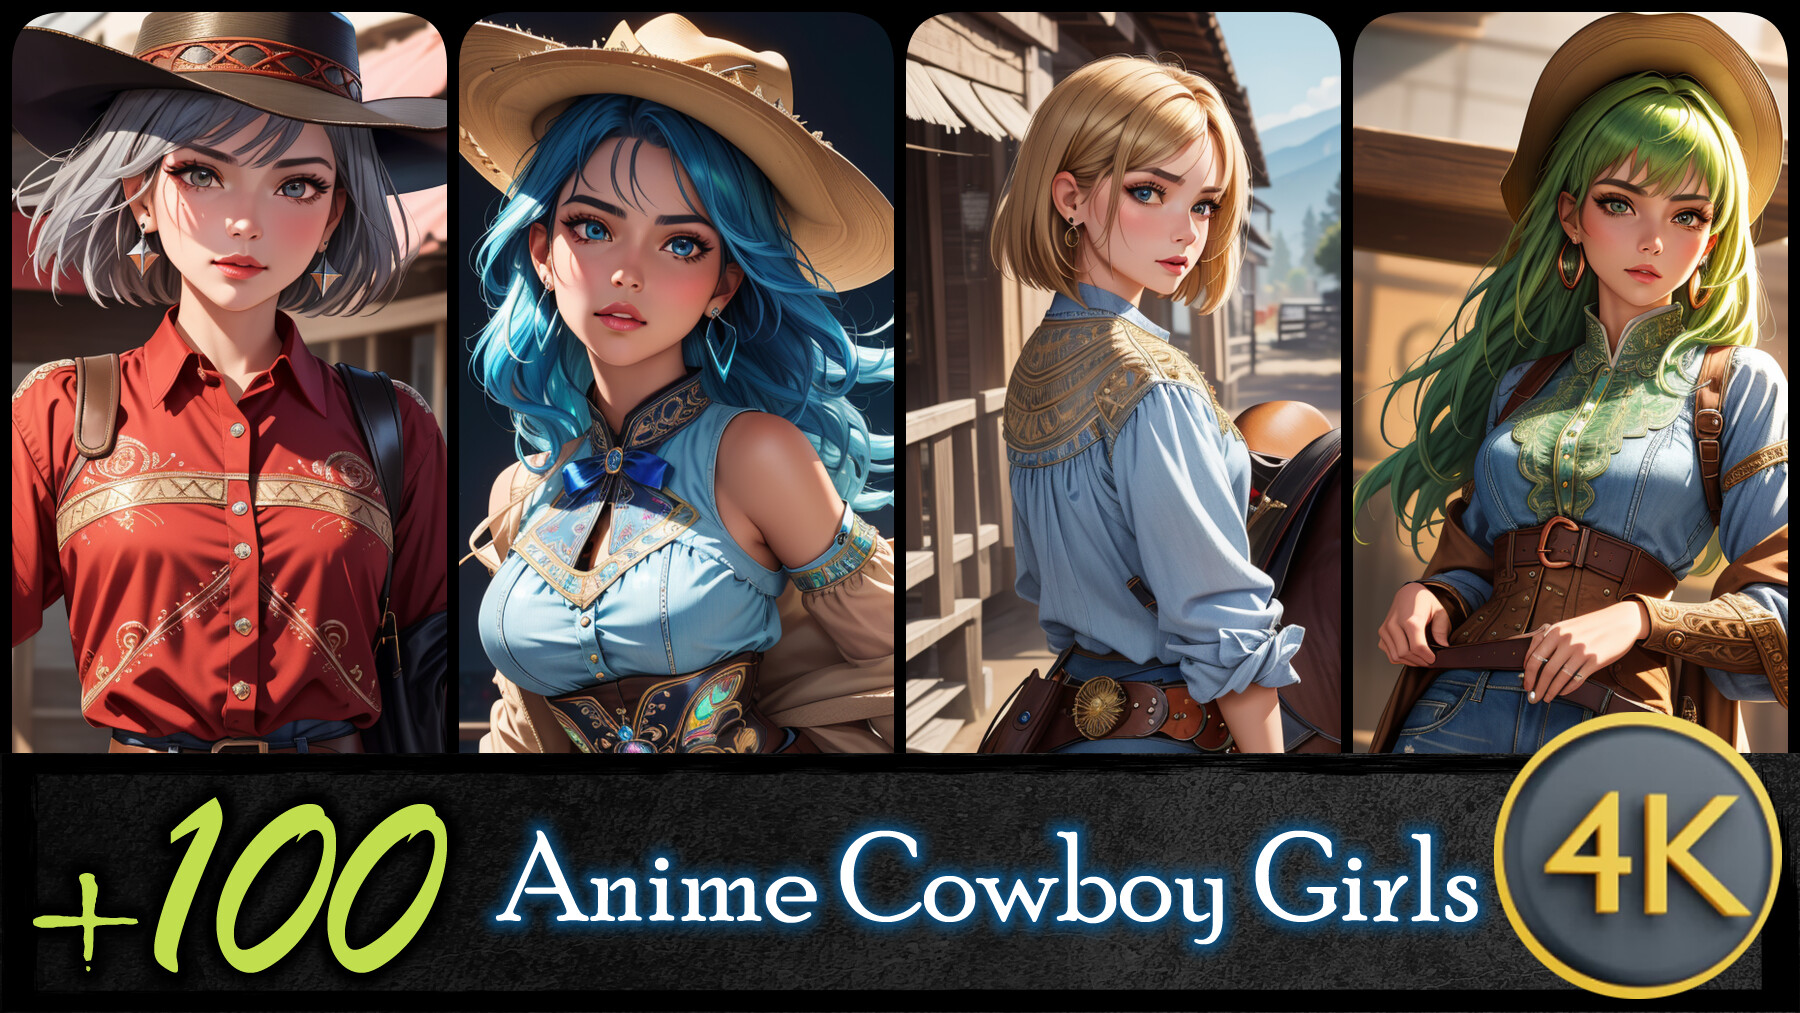 Anime, wild west town, bear, fairy, wizard, ogre, HD, 4K, AI Generated Art  - Image Chest - Free Image Hosting And Sharing Made Easy